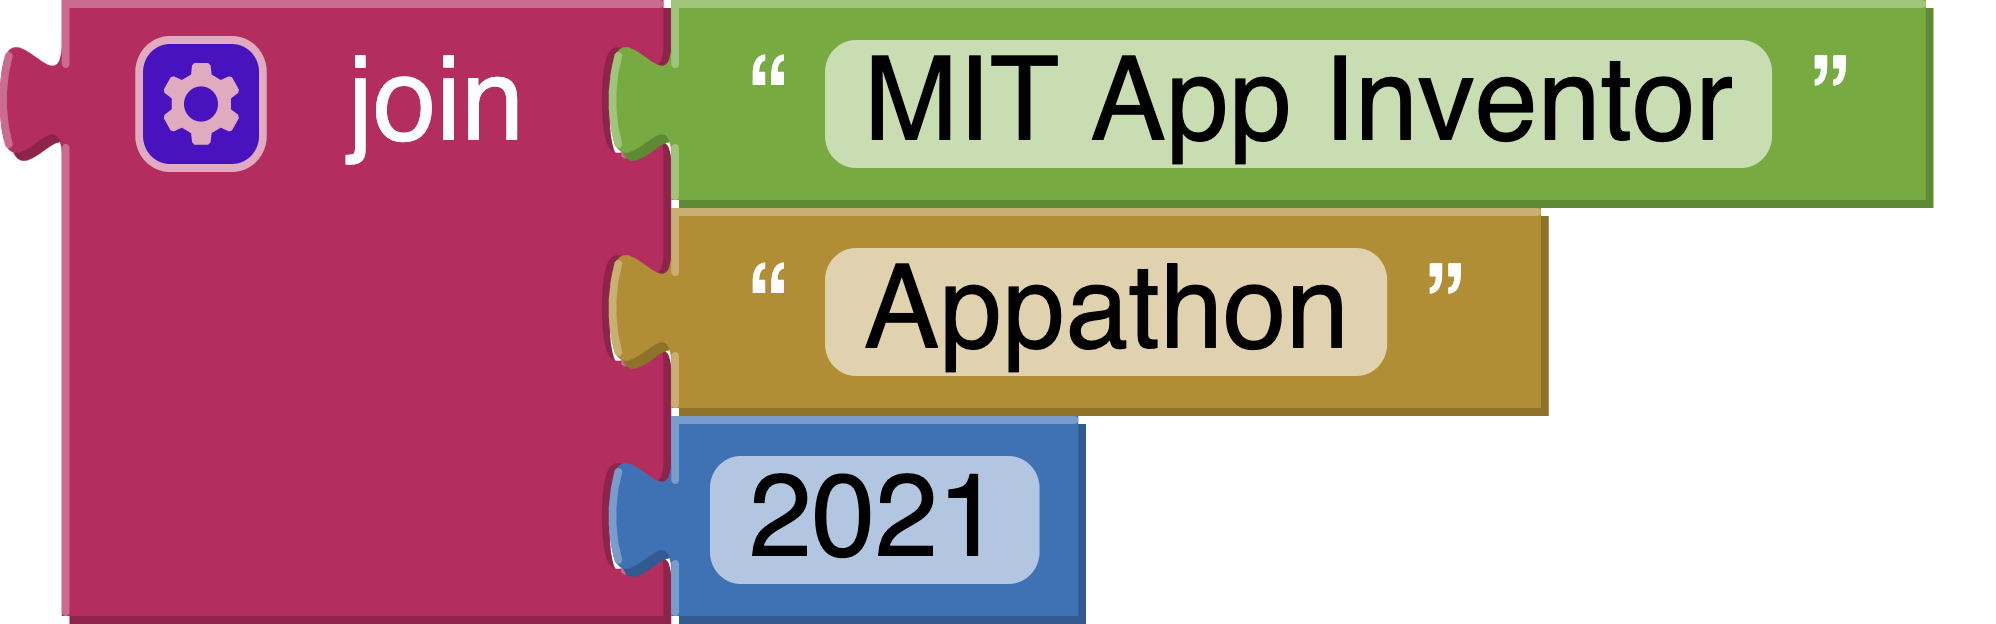 MIT App Inventor Appathon for 2021 - The Coding Bus